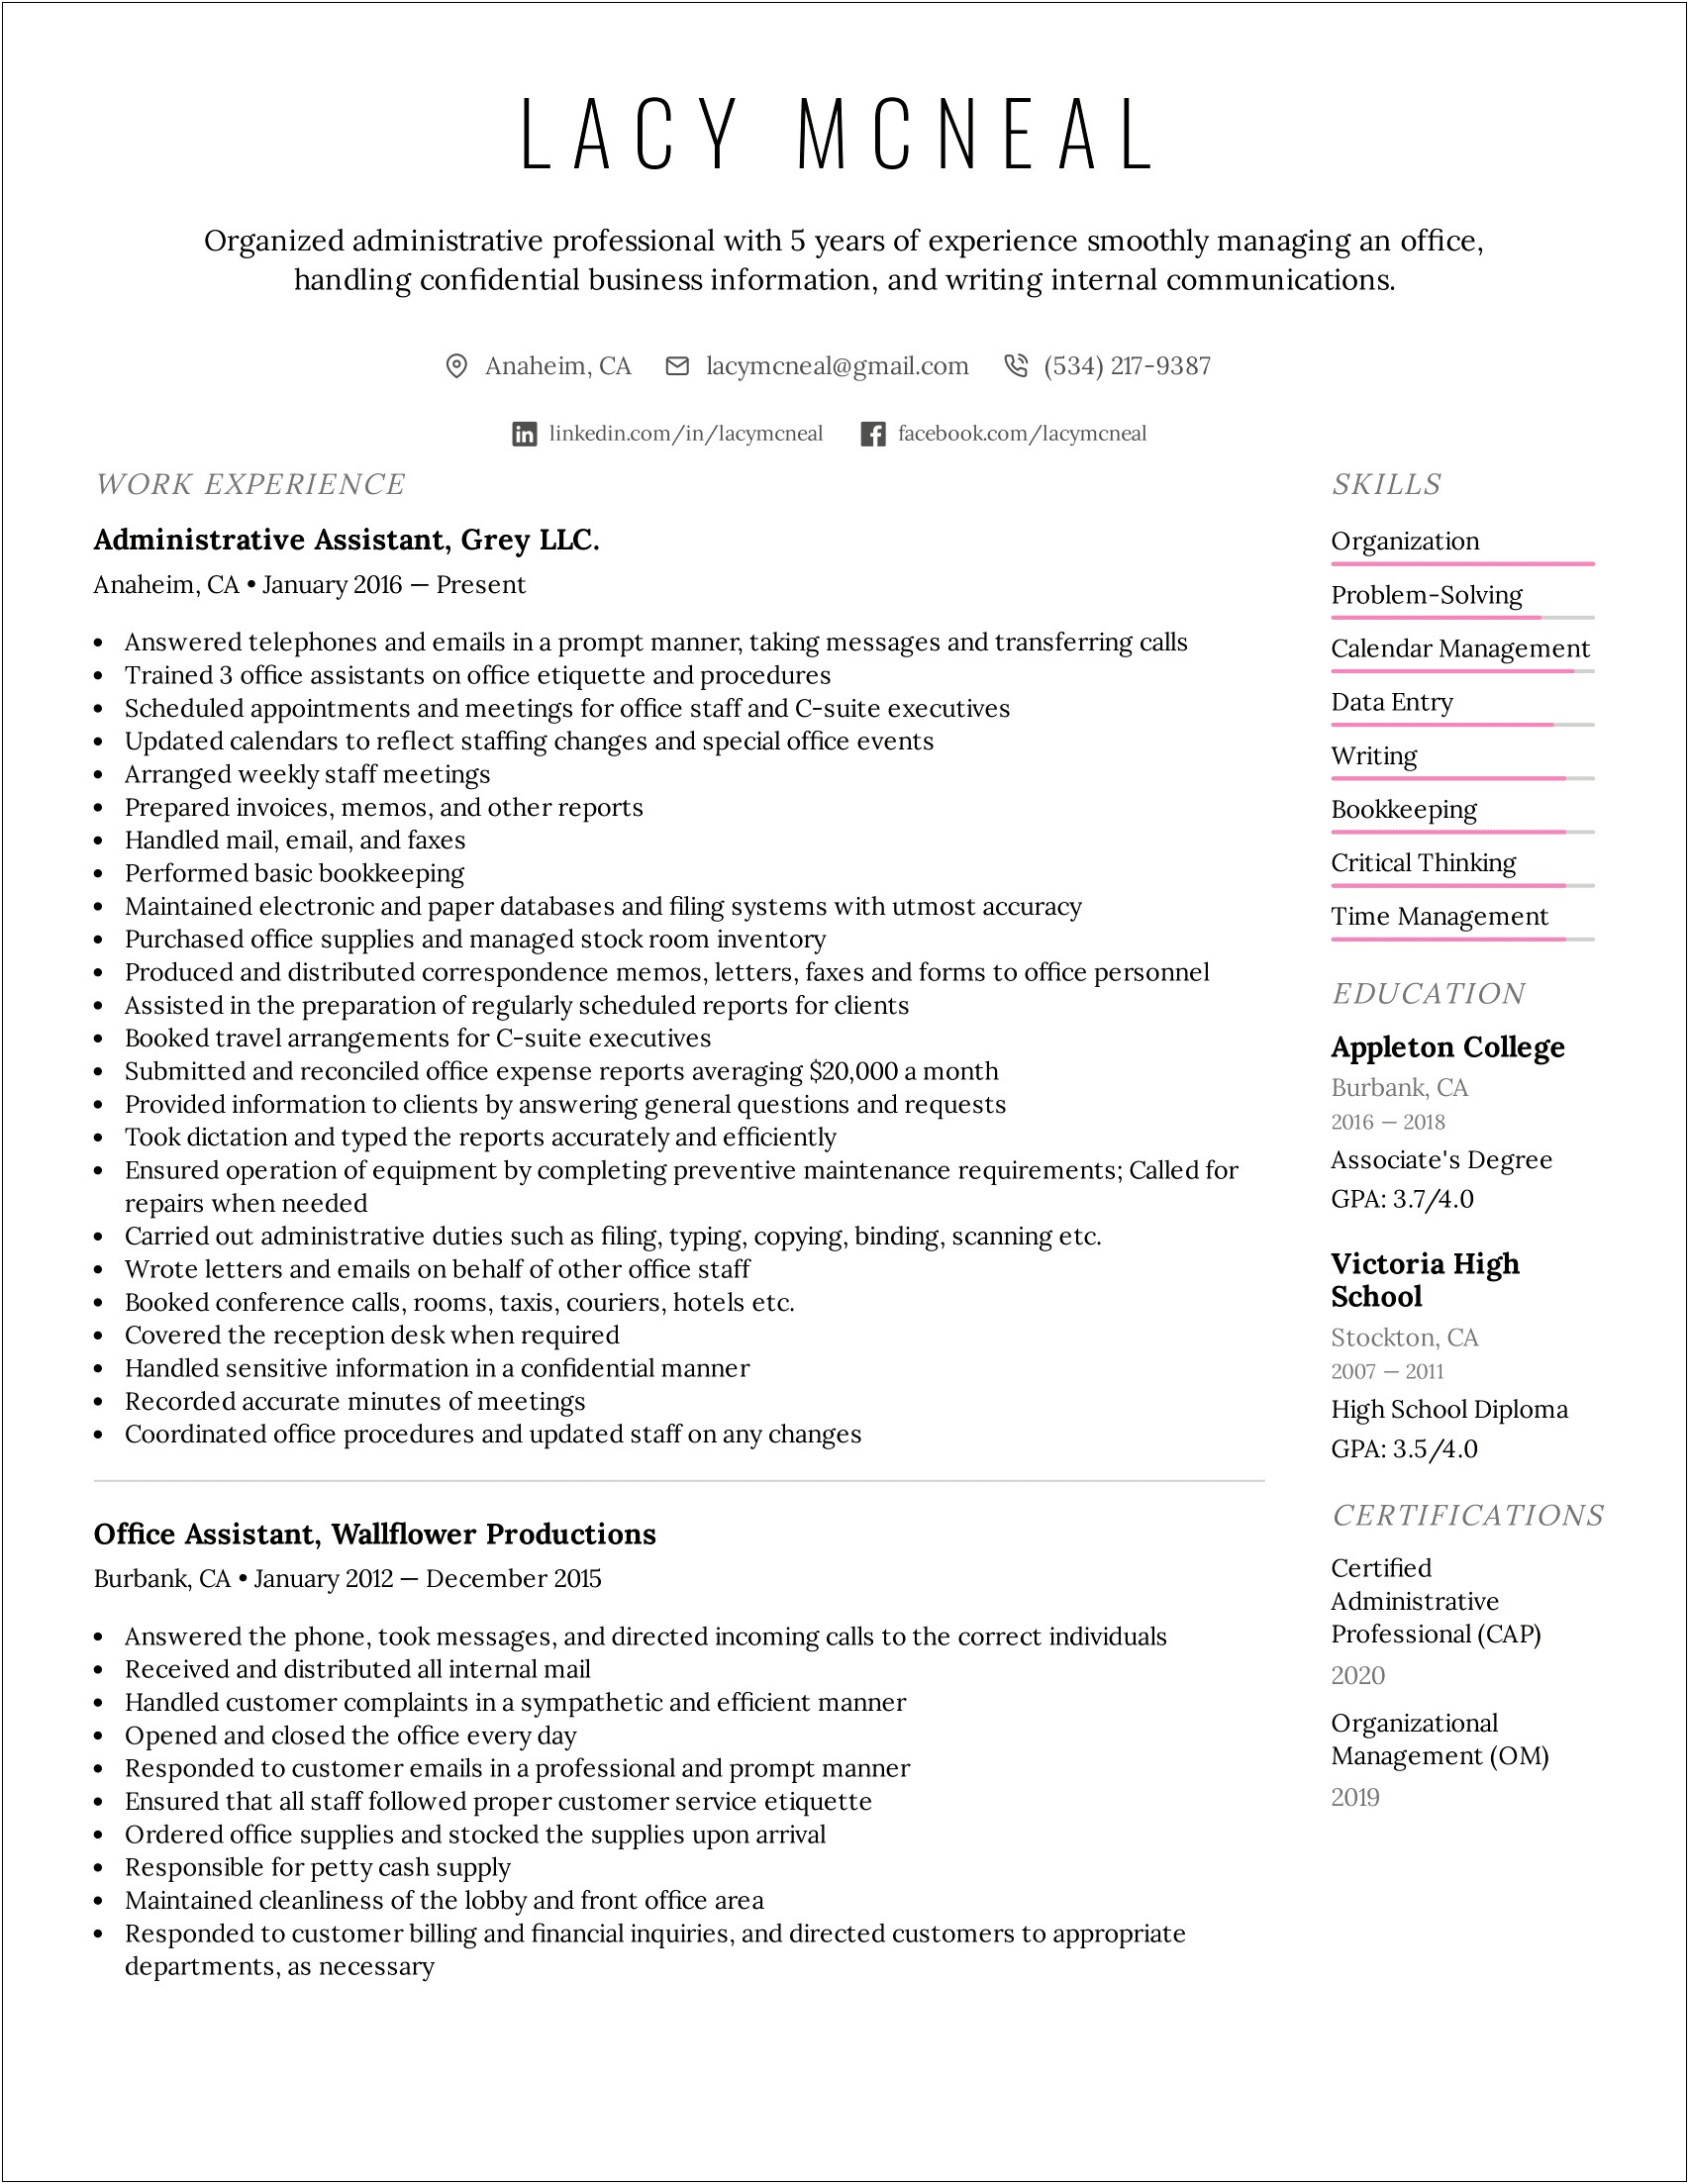 Resume Description Of An Advanced Medical Support Assistant